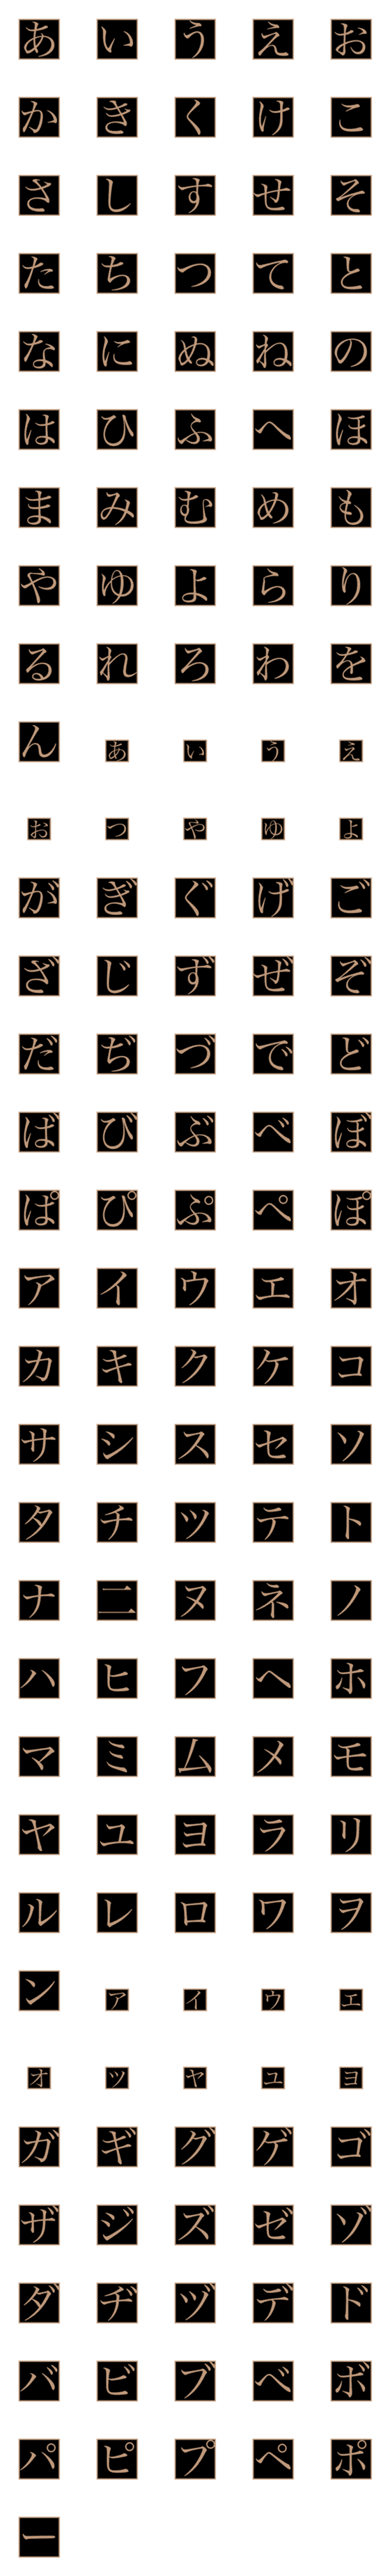 [LINE絵文字]スタンプ文字の画像一覧